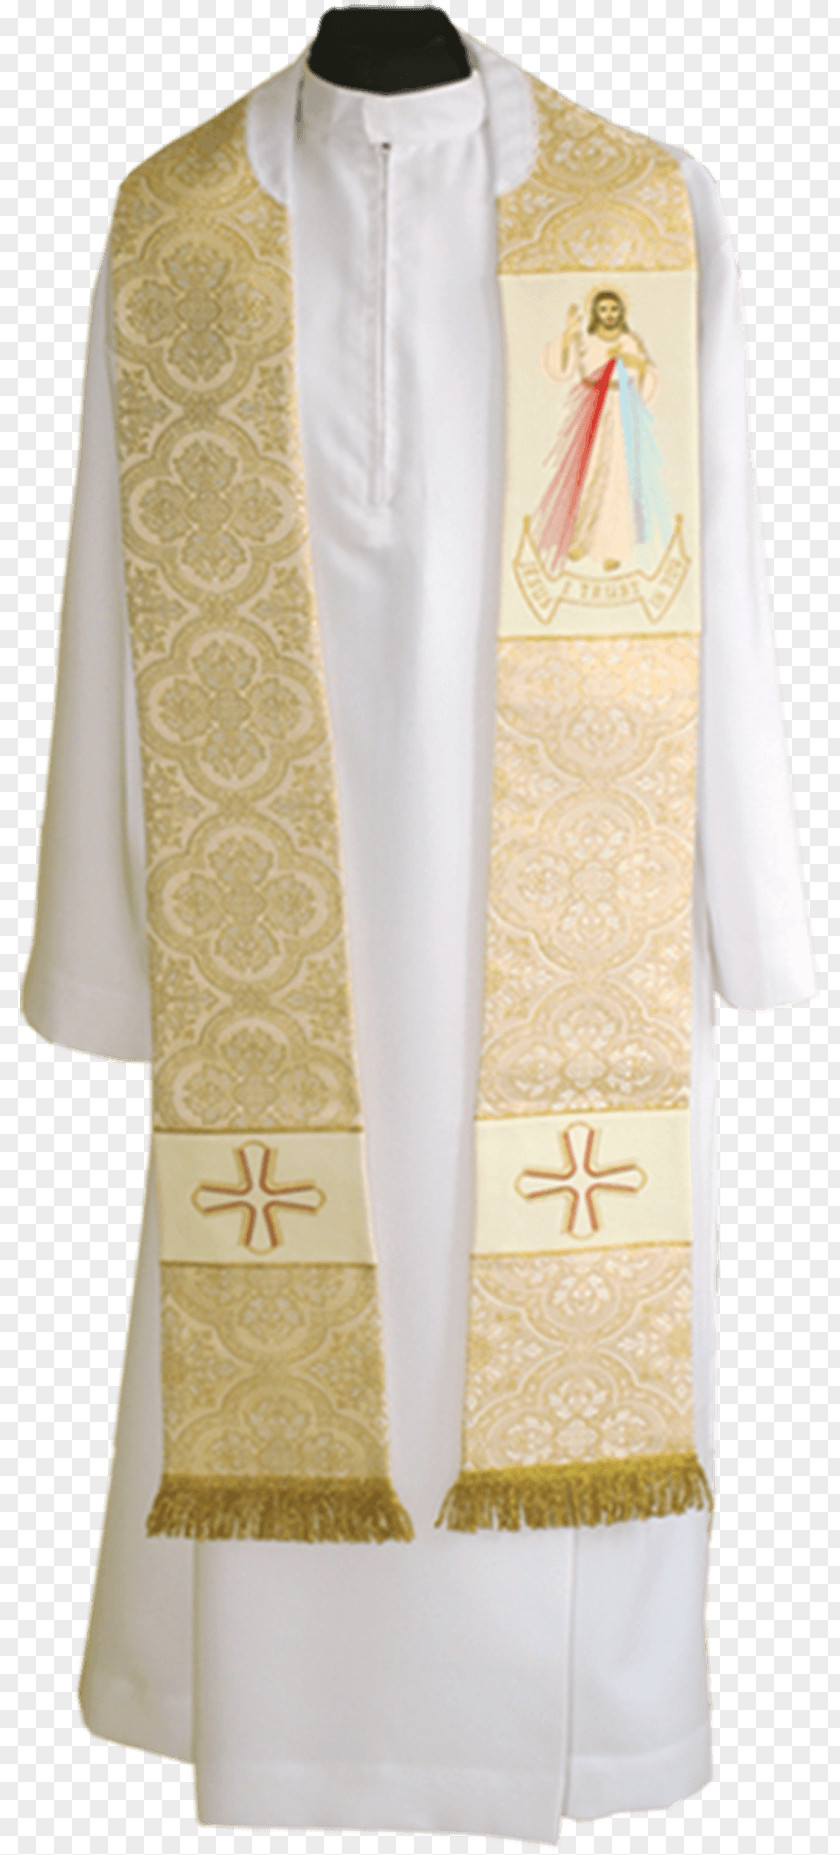 Divine Mercy Image Sleeve Clothes Hanger Blouse Outerwear PNG